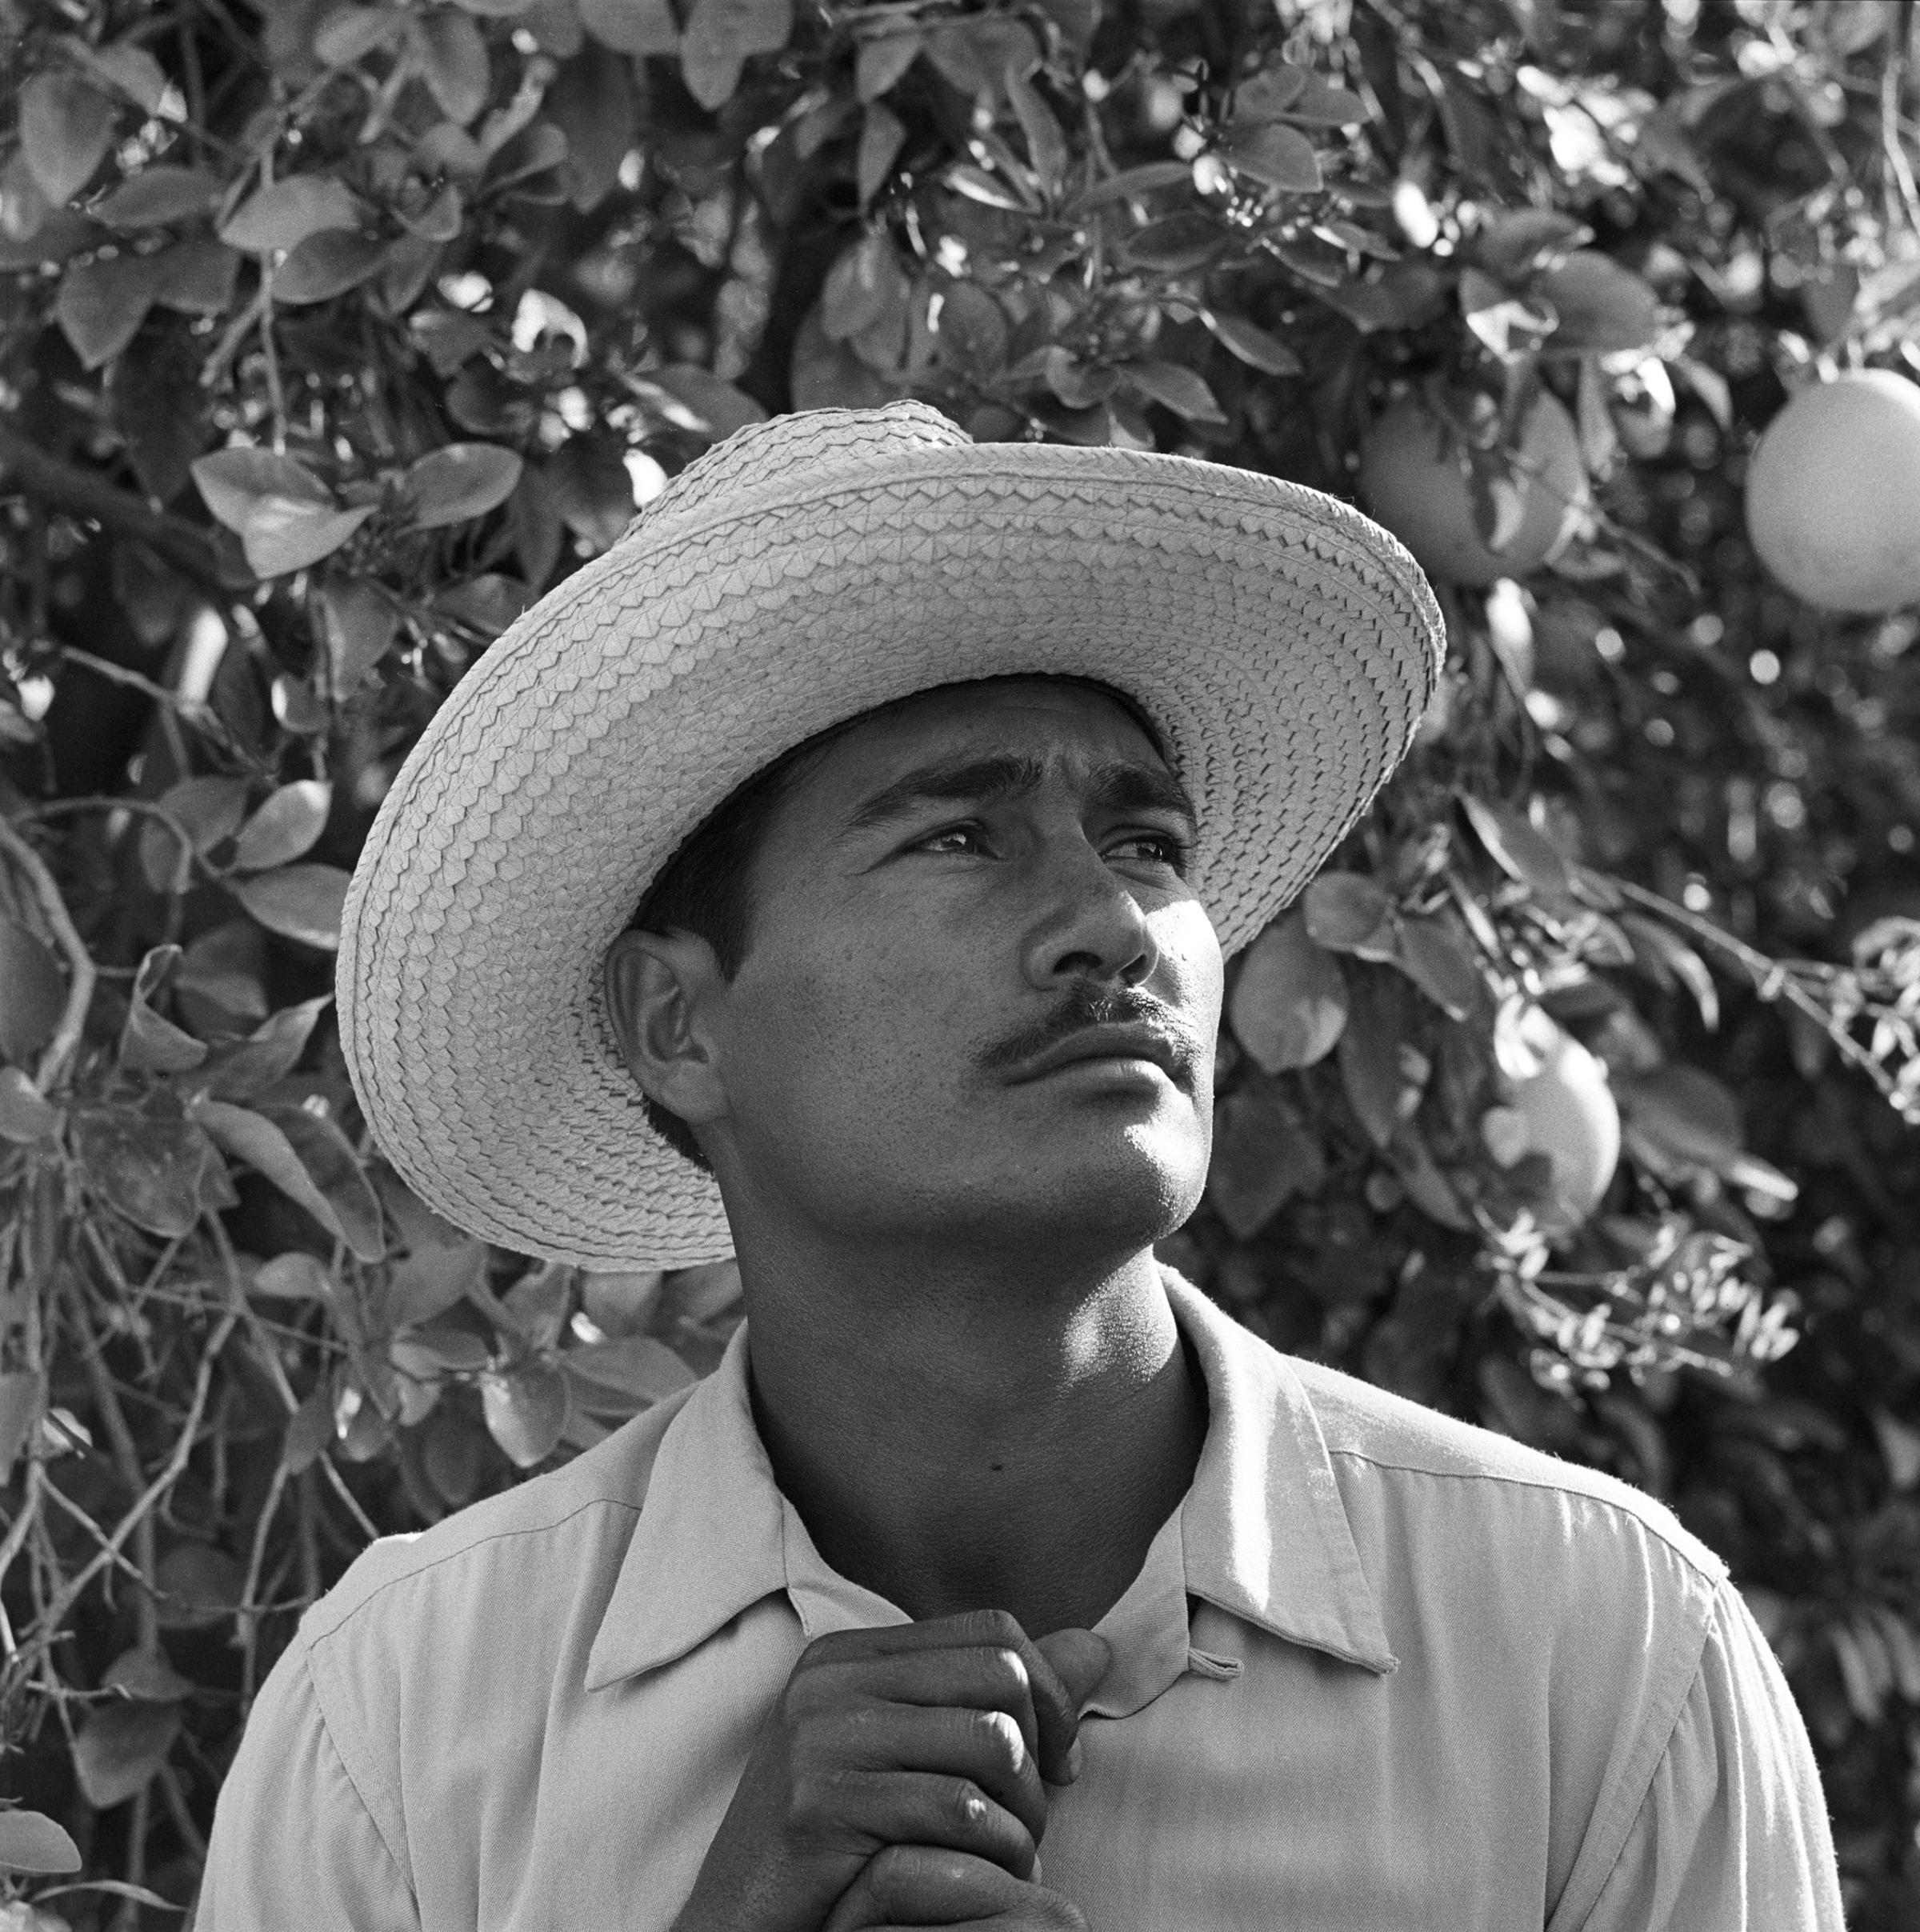 Portrait of Mexican farm laborer, Rafael Tamayo, working in the United States under the Bracero Program, 1957.